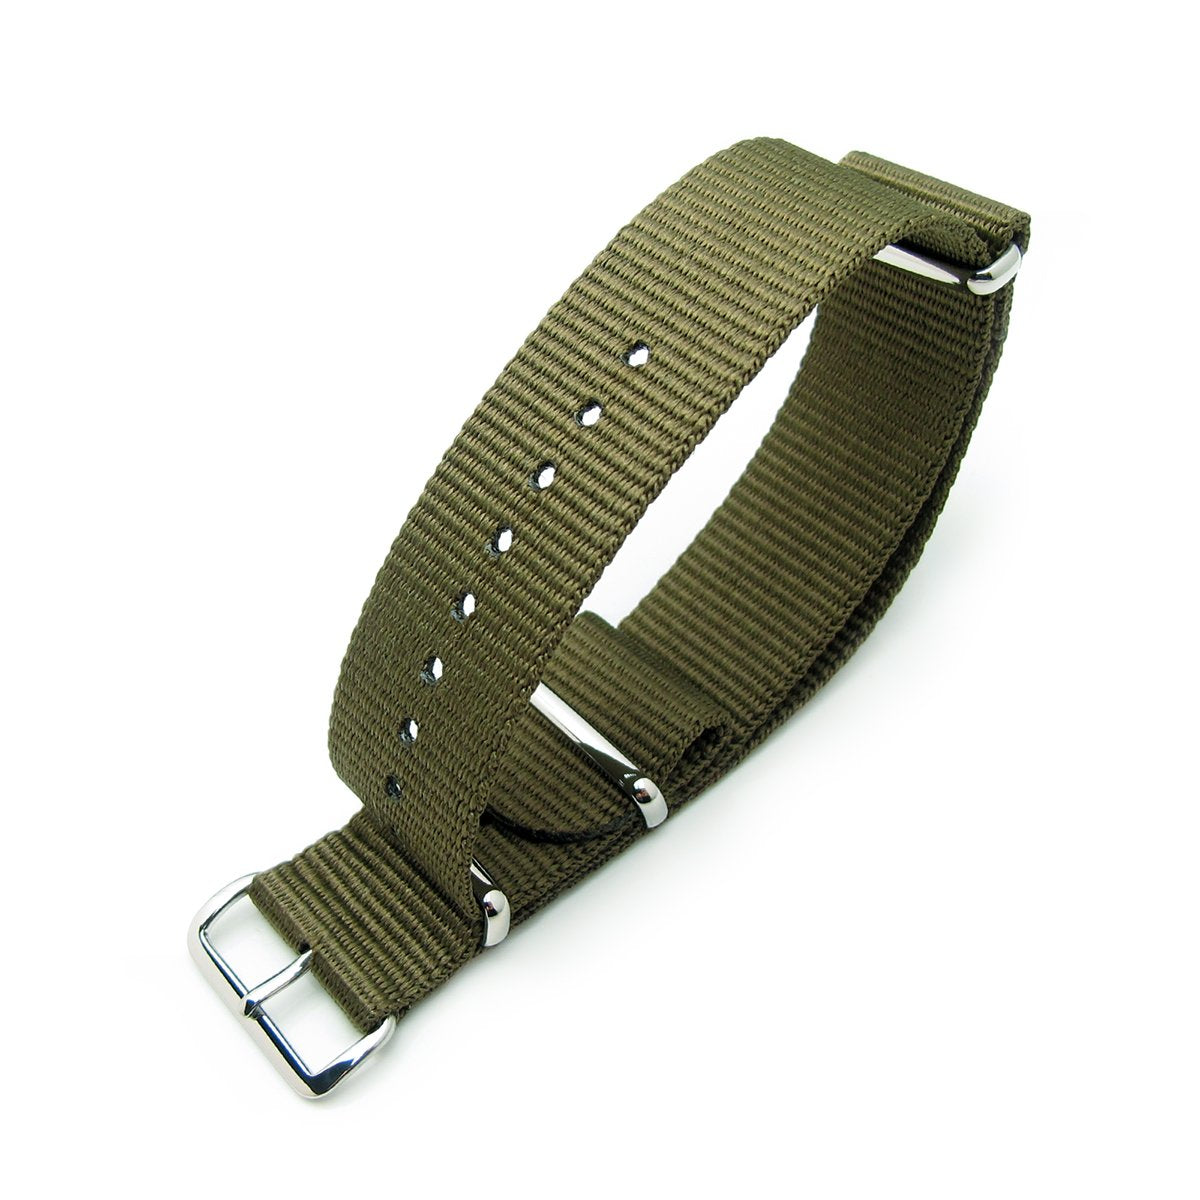 MiLTAT 22mm G10 military watch strap ballistic nylon armband Polished Military Green Strapcode Watch Bands